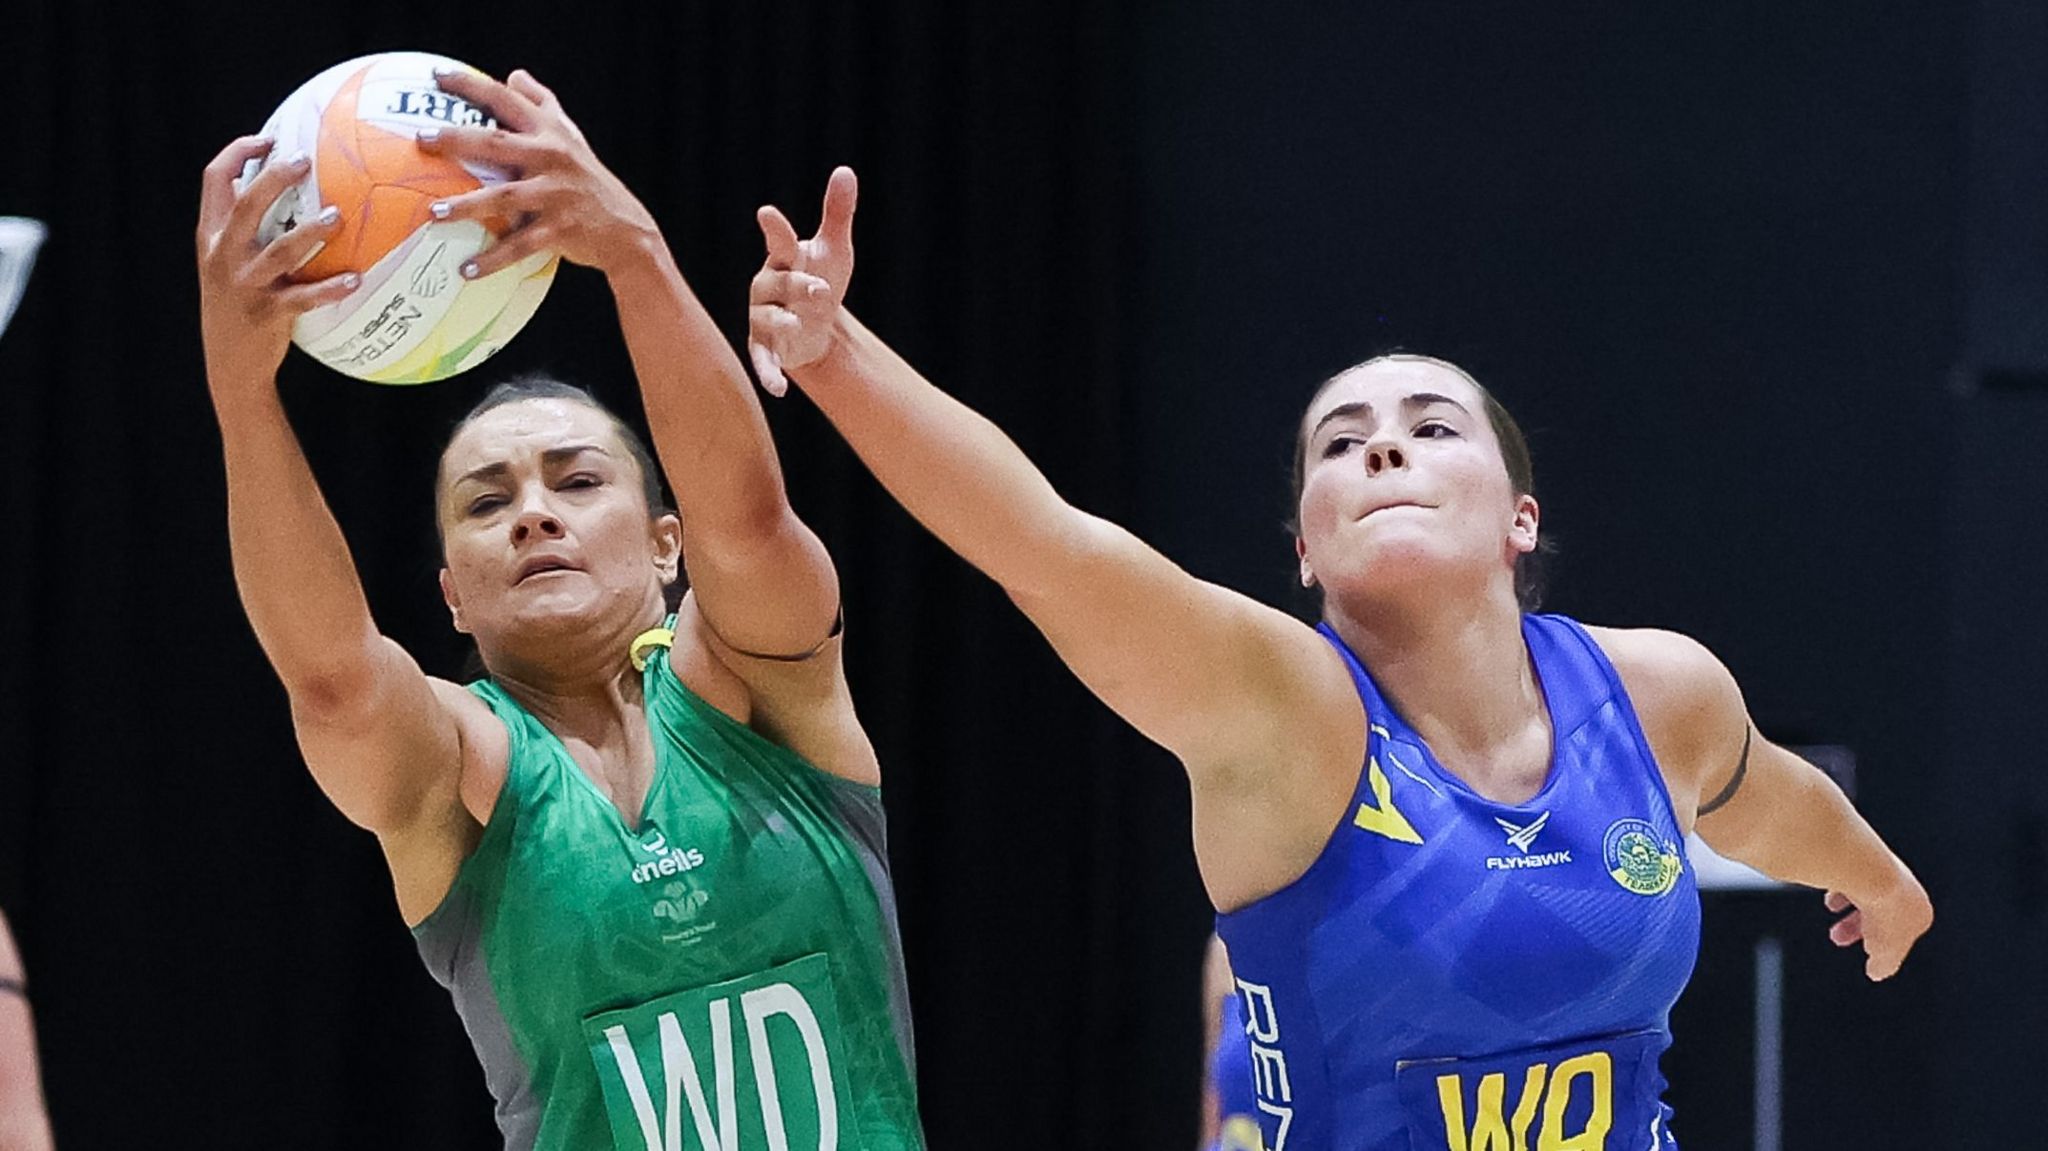 Nia Jones of Cardiff Dragons and Kirsty Harris of Team Bath competing for the ball